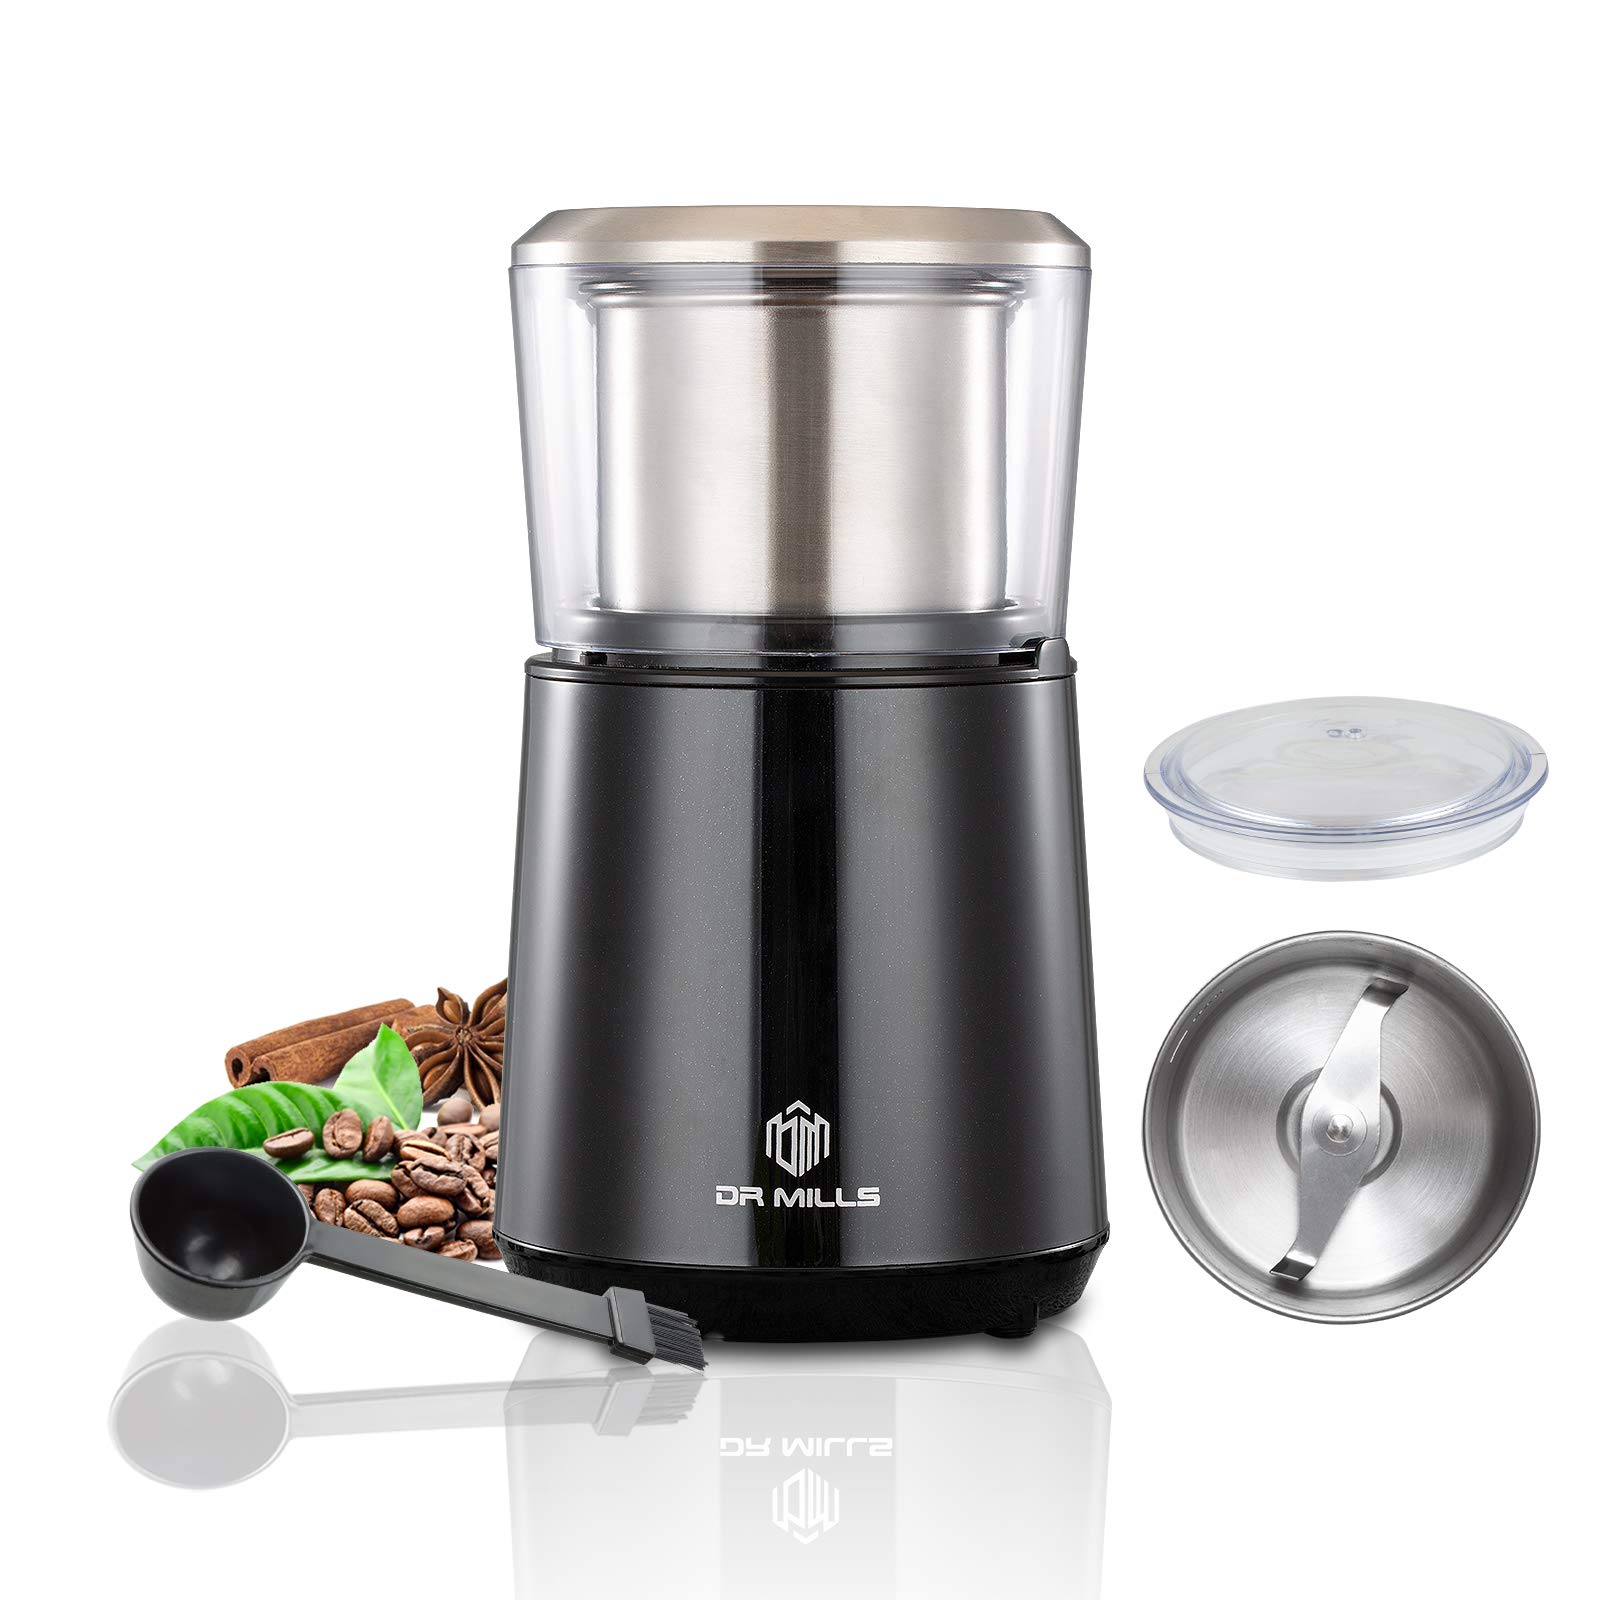 DR MILLS Electric coffee grinder, Dried Spice